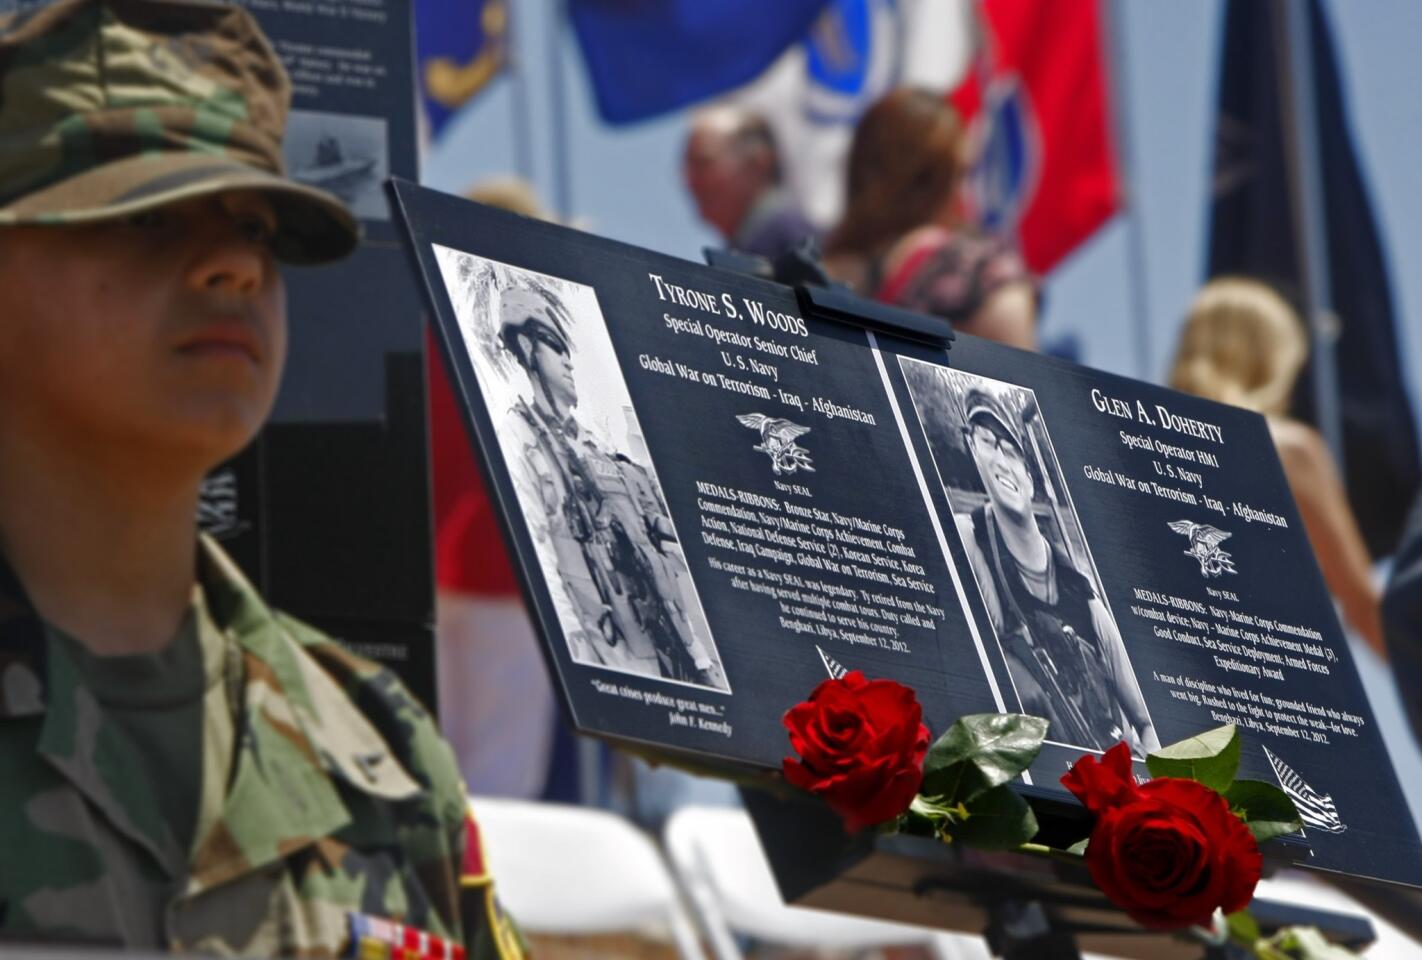 Plaques honoring Tyrone Woods and Glen Doherty are displayed at the Mt. Soledad memorial in San Diego. The former Navy SEALs were working as security contractors when they were killed in an attack near a U.S. diplomatic compound in Benghazi, Libya.